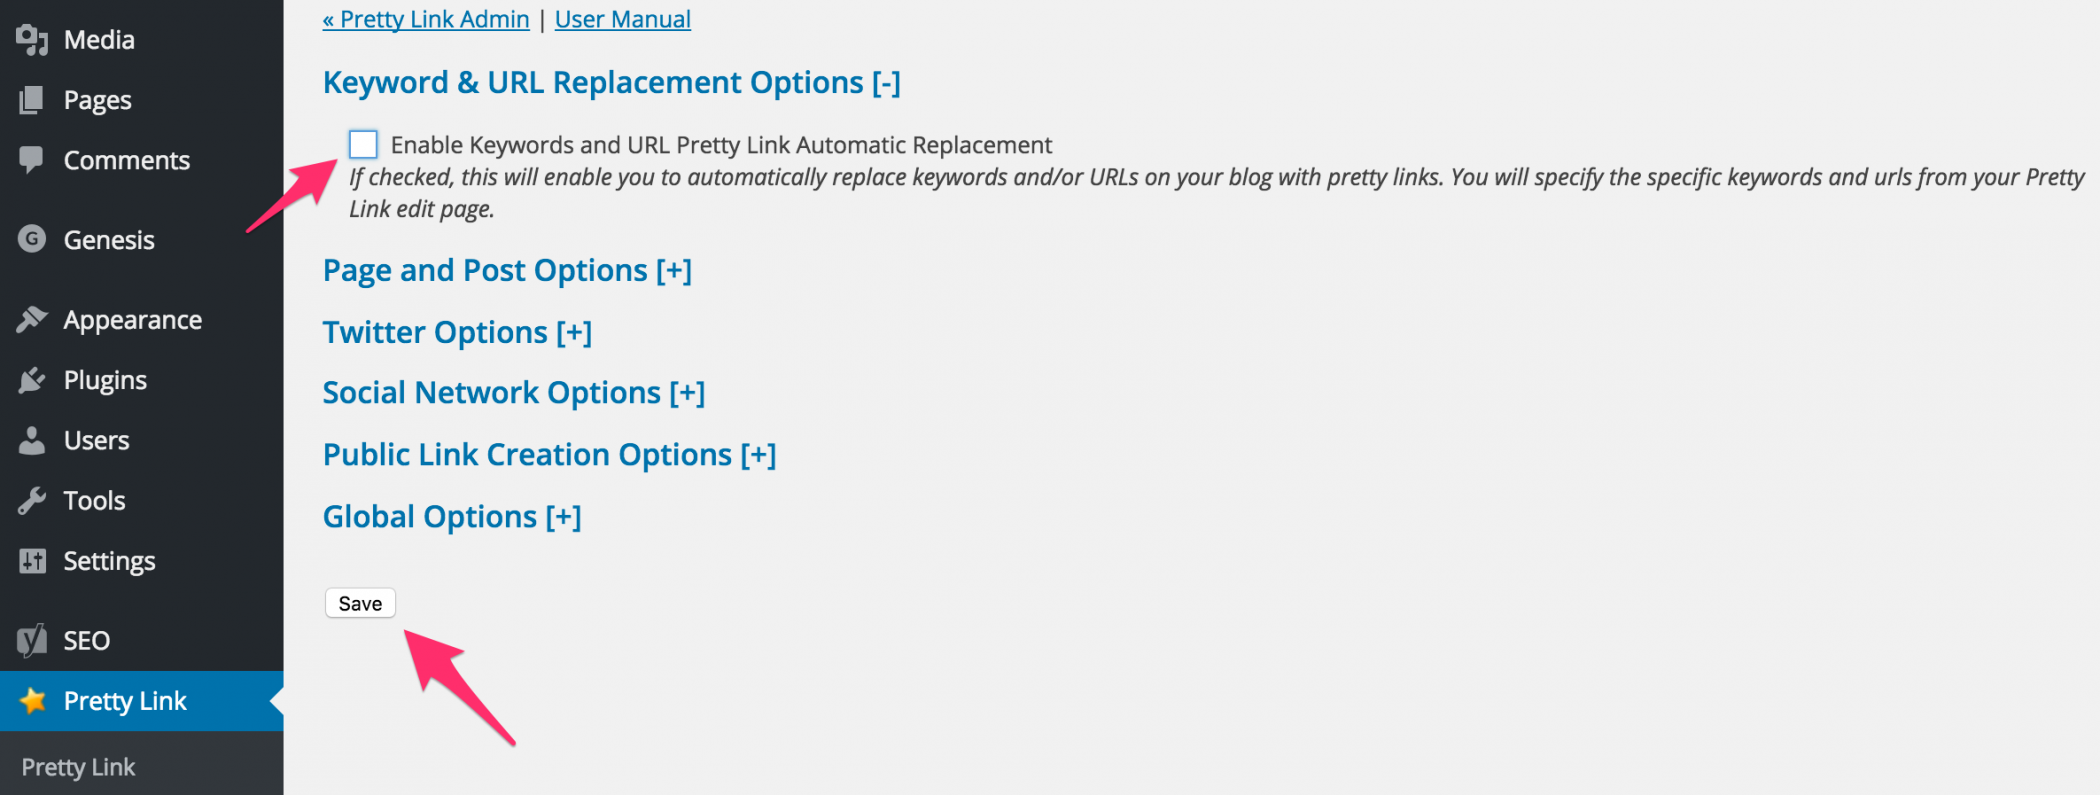 Pretty Link Disable Keyword Replacement Options